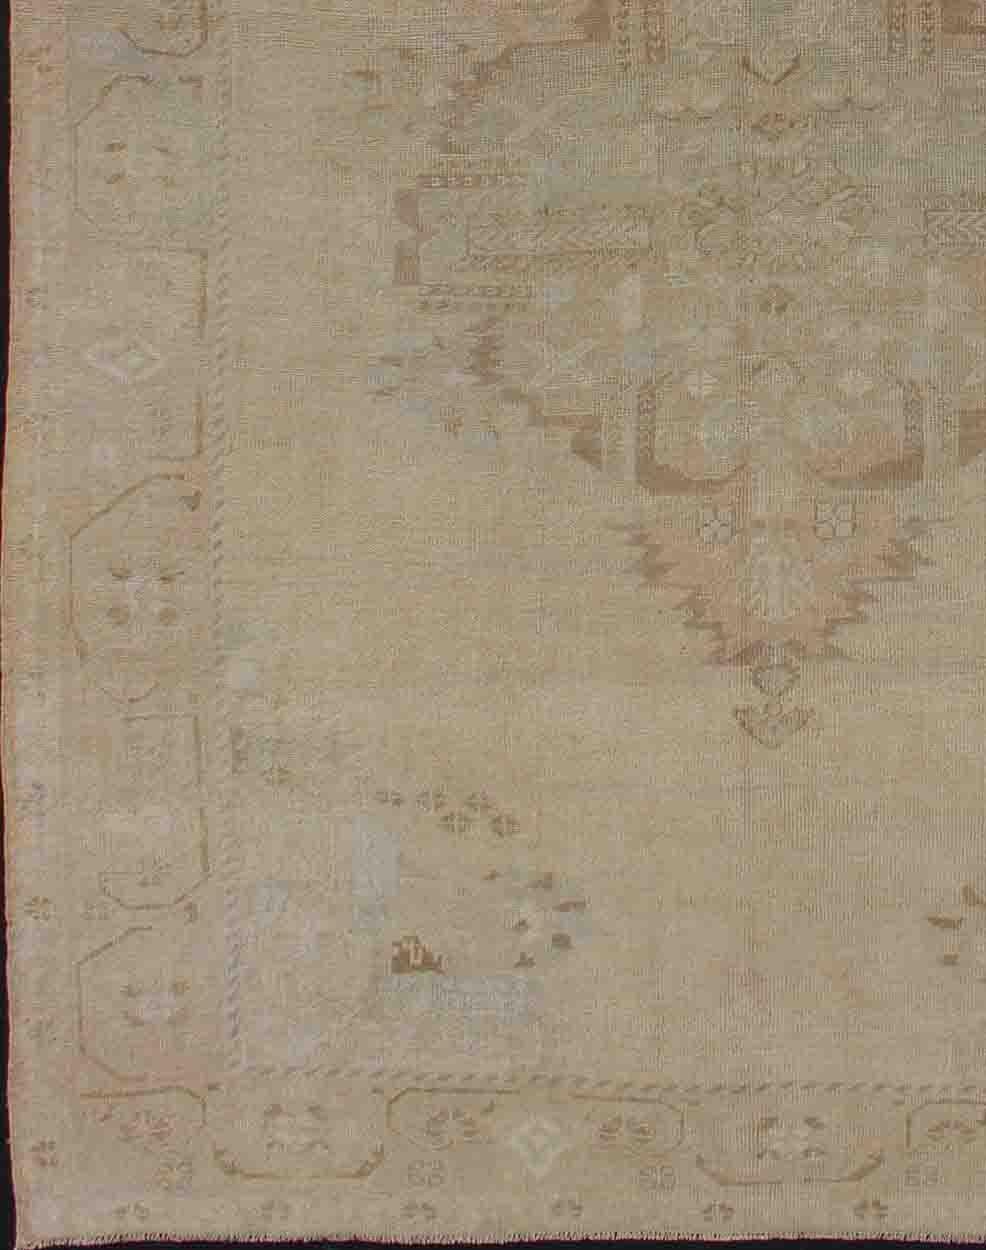 Medallion design Turkish vintage rug in neutral tones, rug en-10651, country of origin / type: Turkey / Oushak, circa 1940.

This vintage Turkish Oushak carpet (circa mid-20th century) features a central medallion design, as well as patterns of